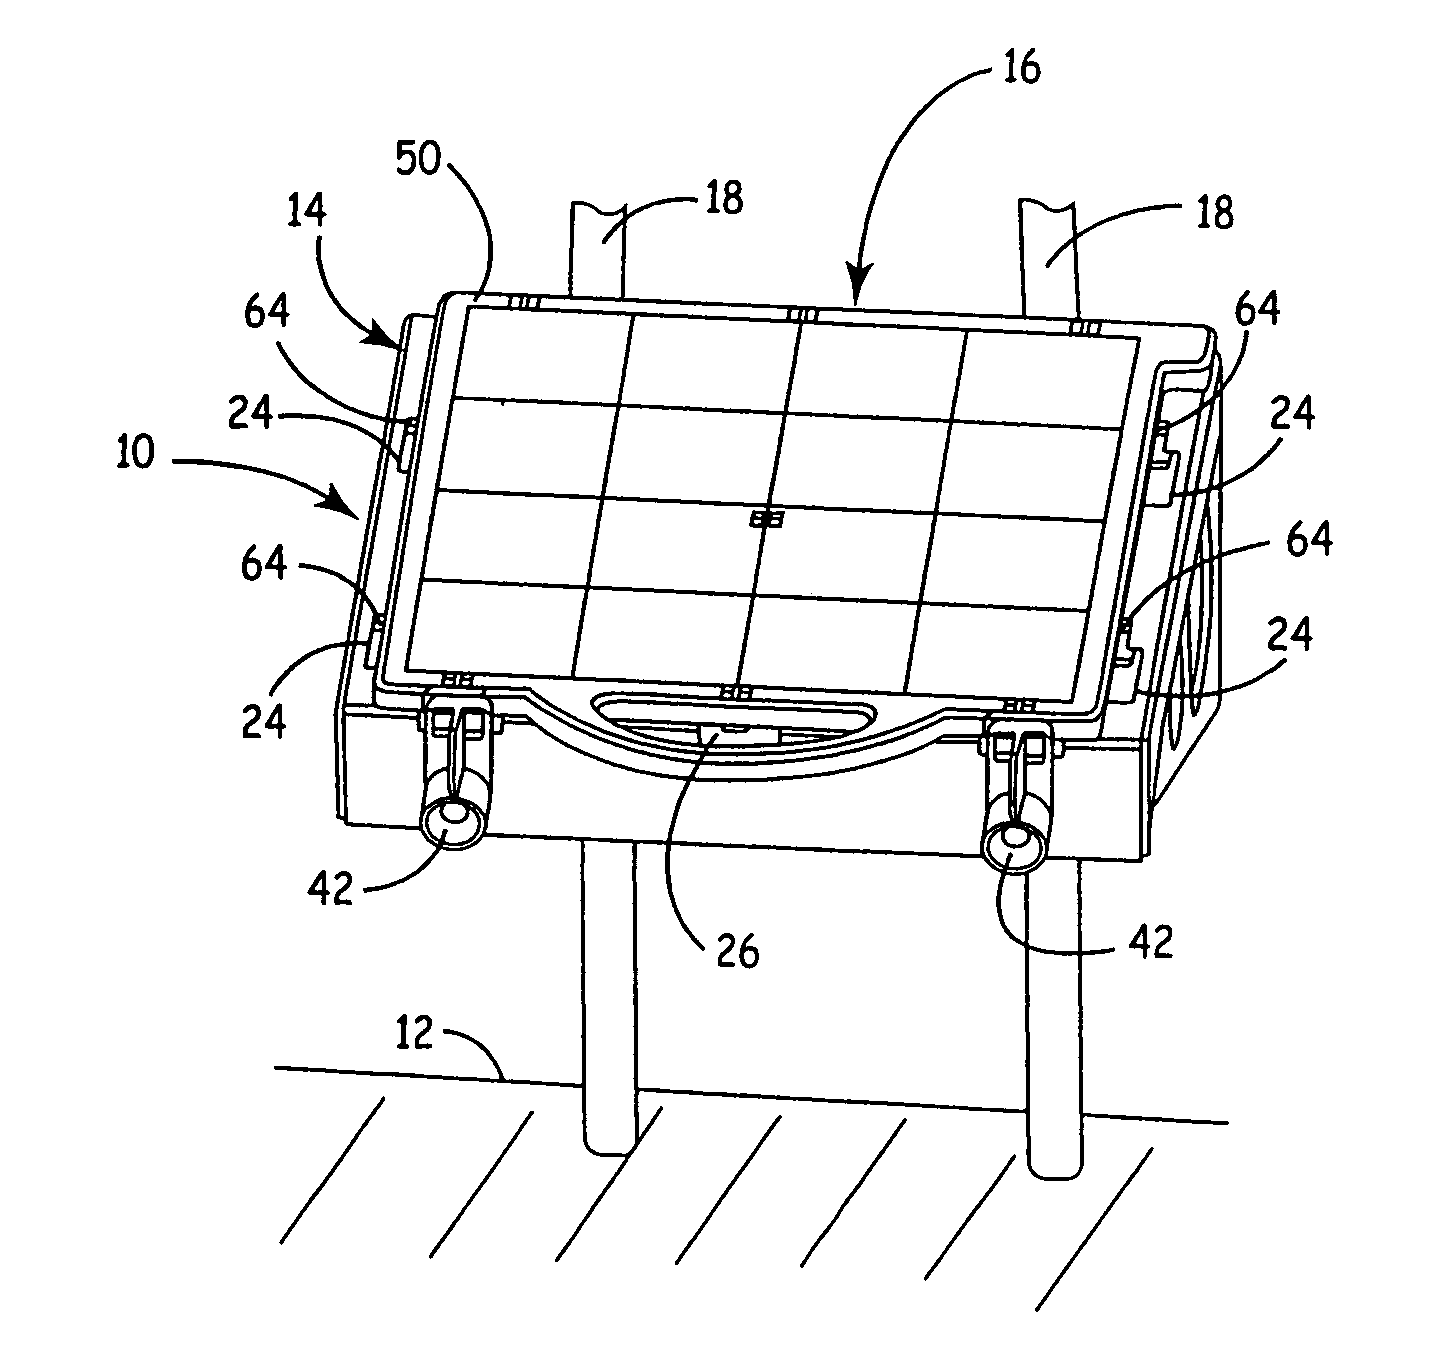 Modeling apparatus with tray substrate